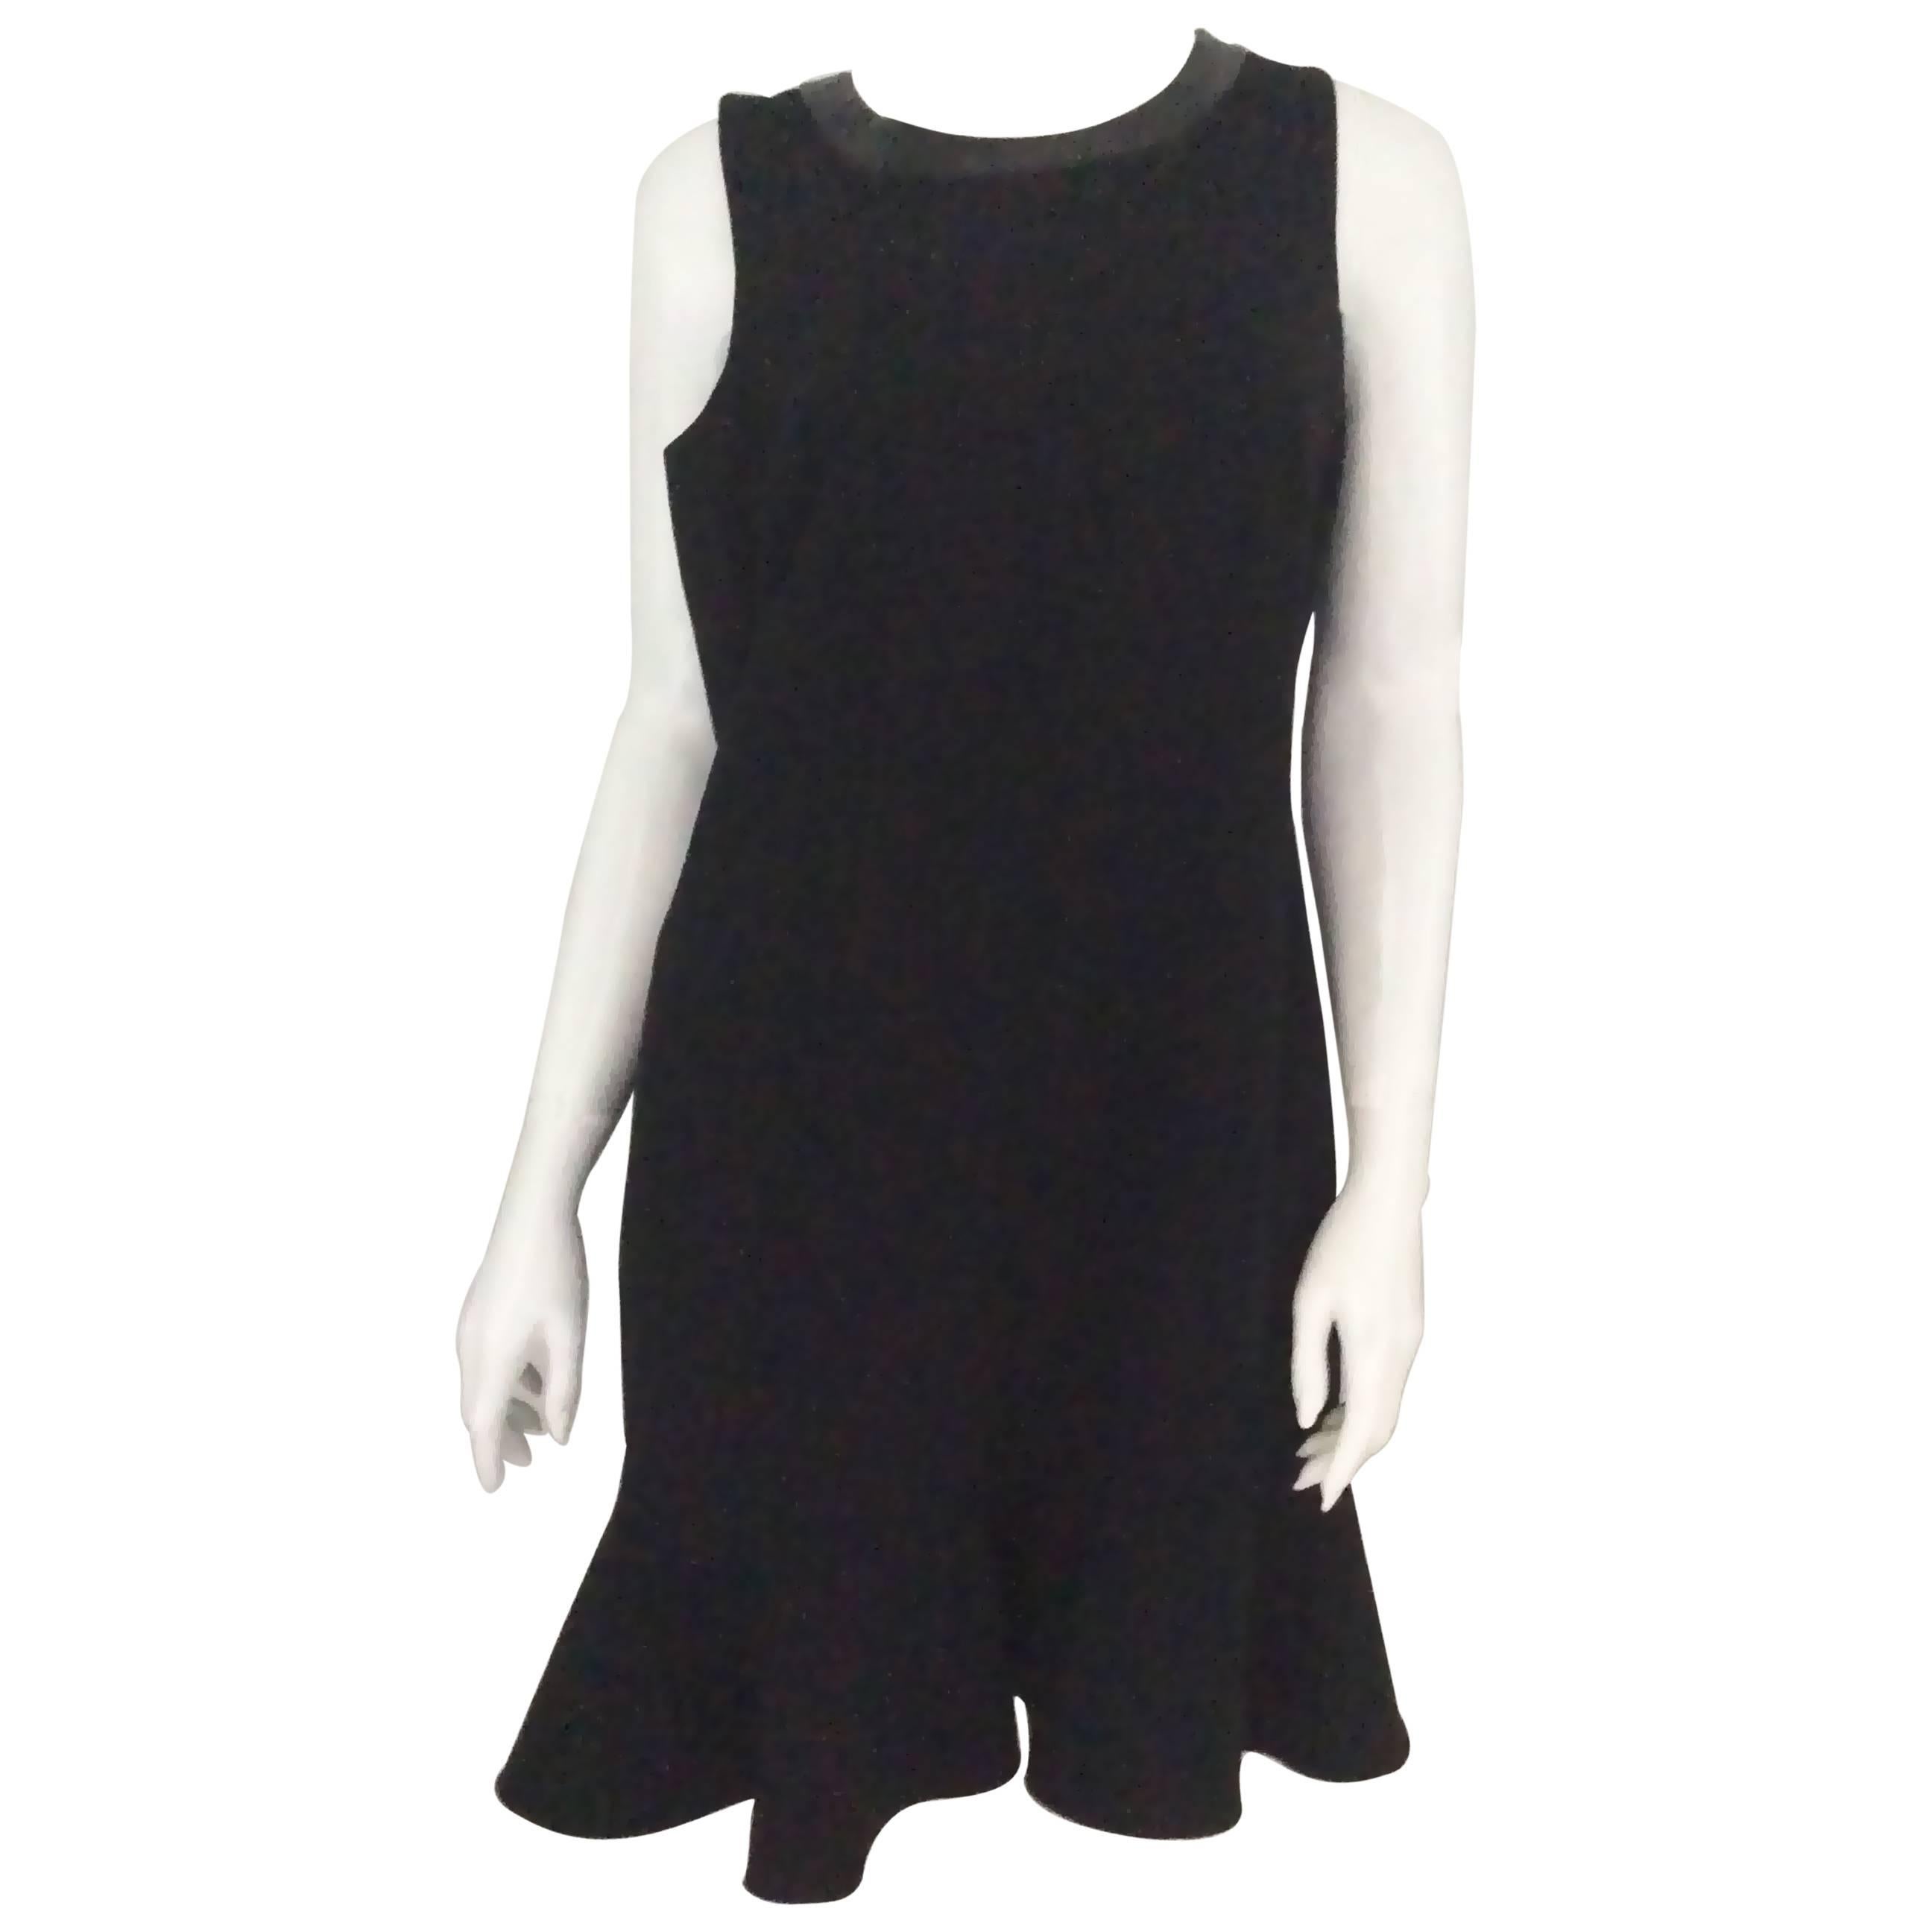 Ralph Lauren Black Label Sleeveless Dress - New With Tags For Sale